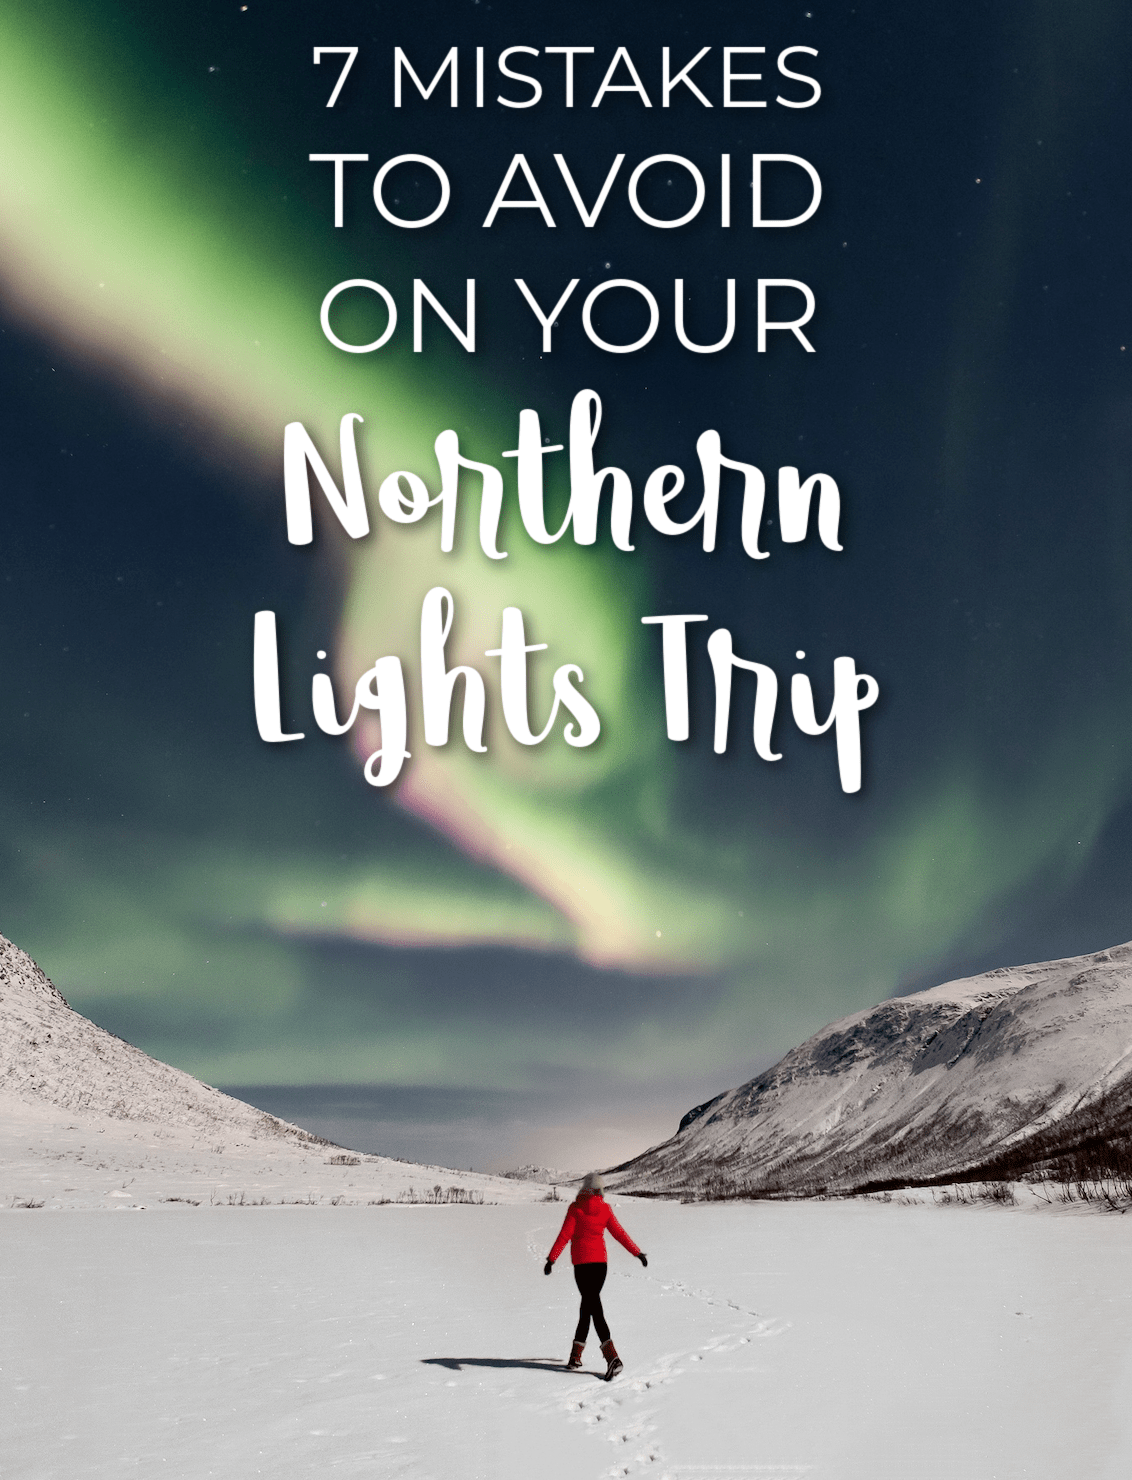 Everything you need to know to see the northern lights in Norway